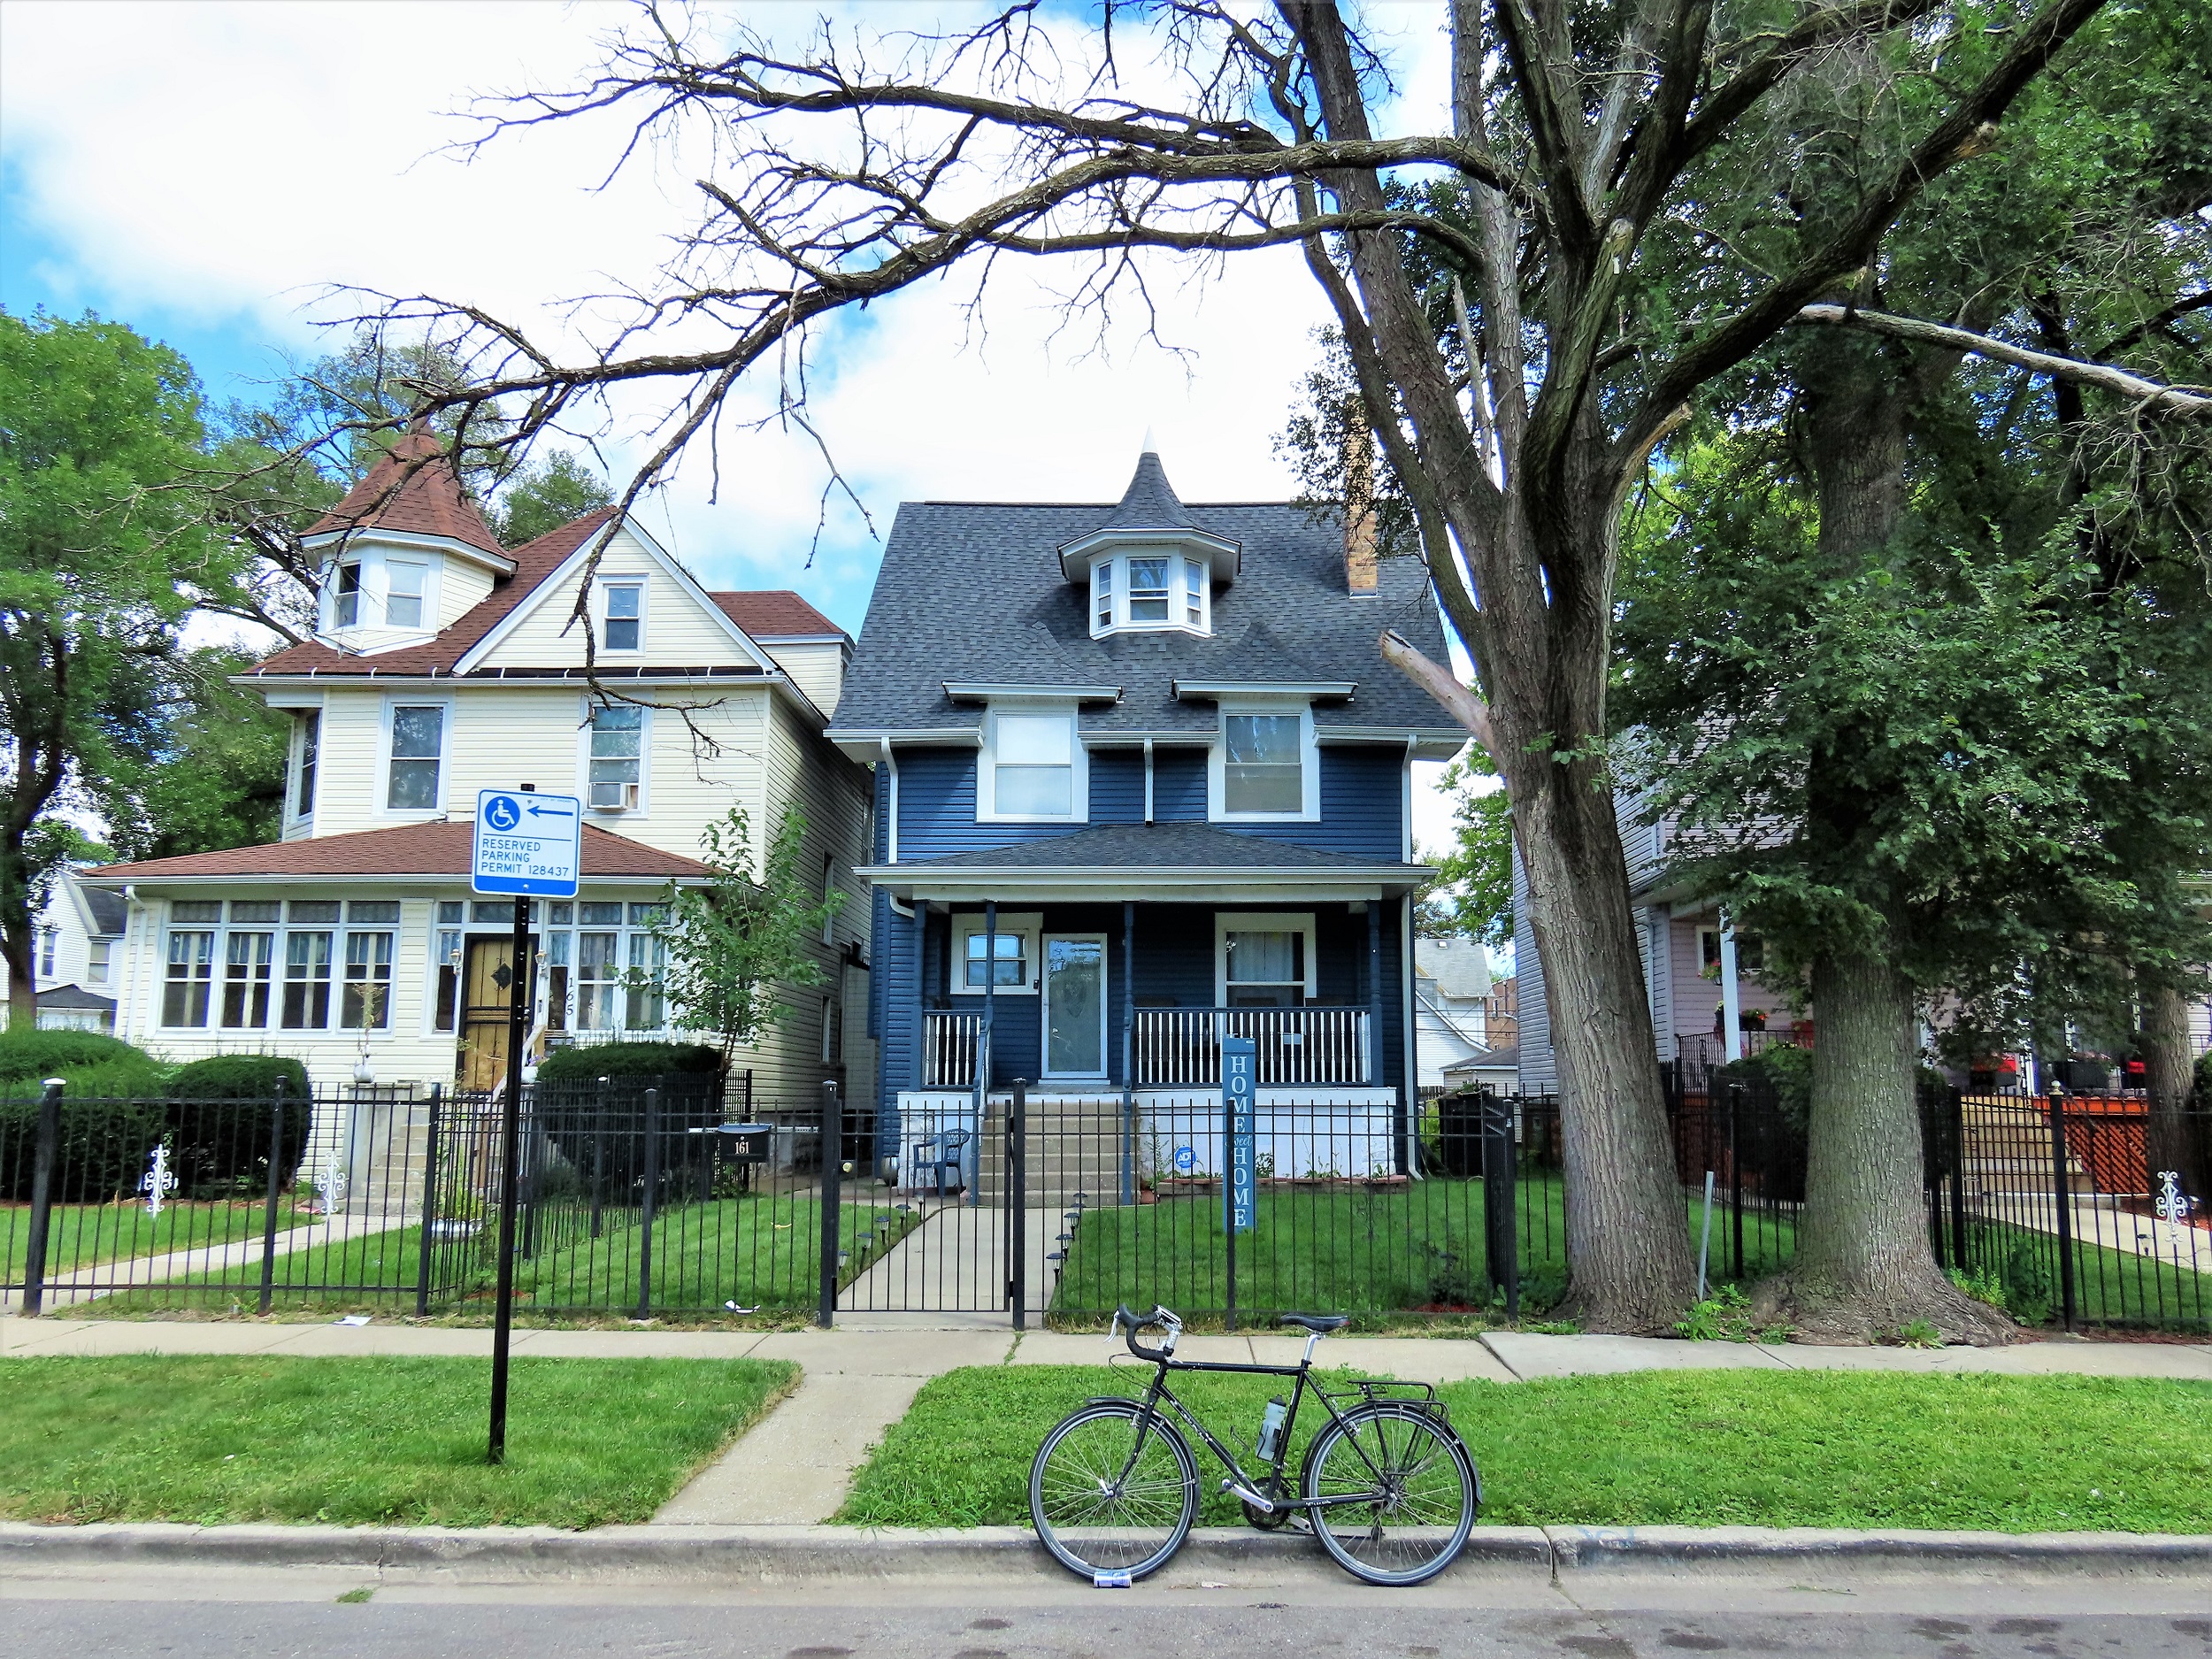 A tour bike standing at front of a three story dark blue and white trim 1890s wood residence with a small round witch hatted roof dormer in between two square witch hatted second floor windows.